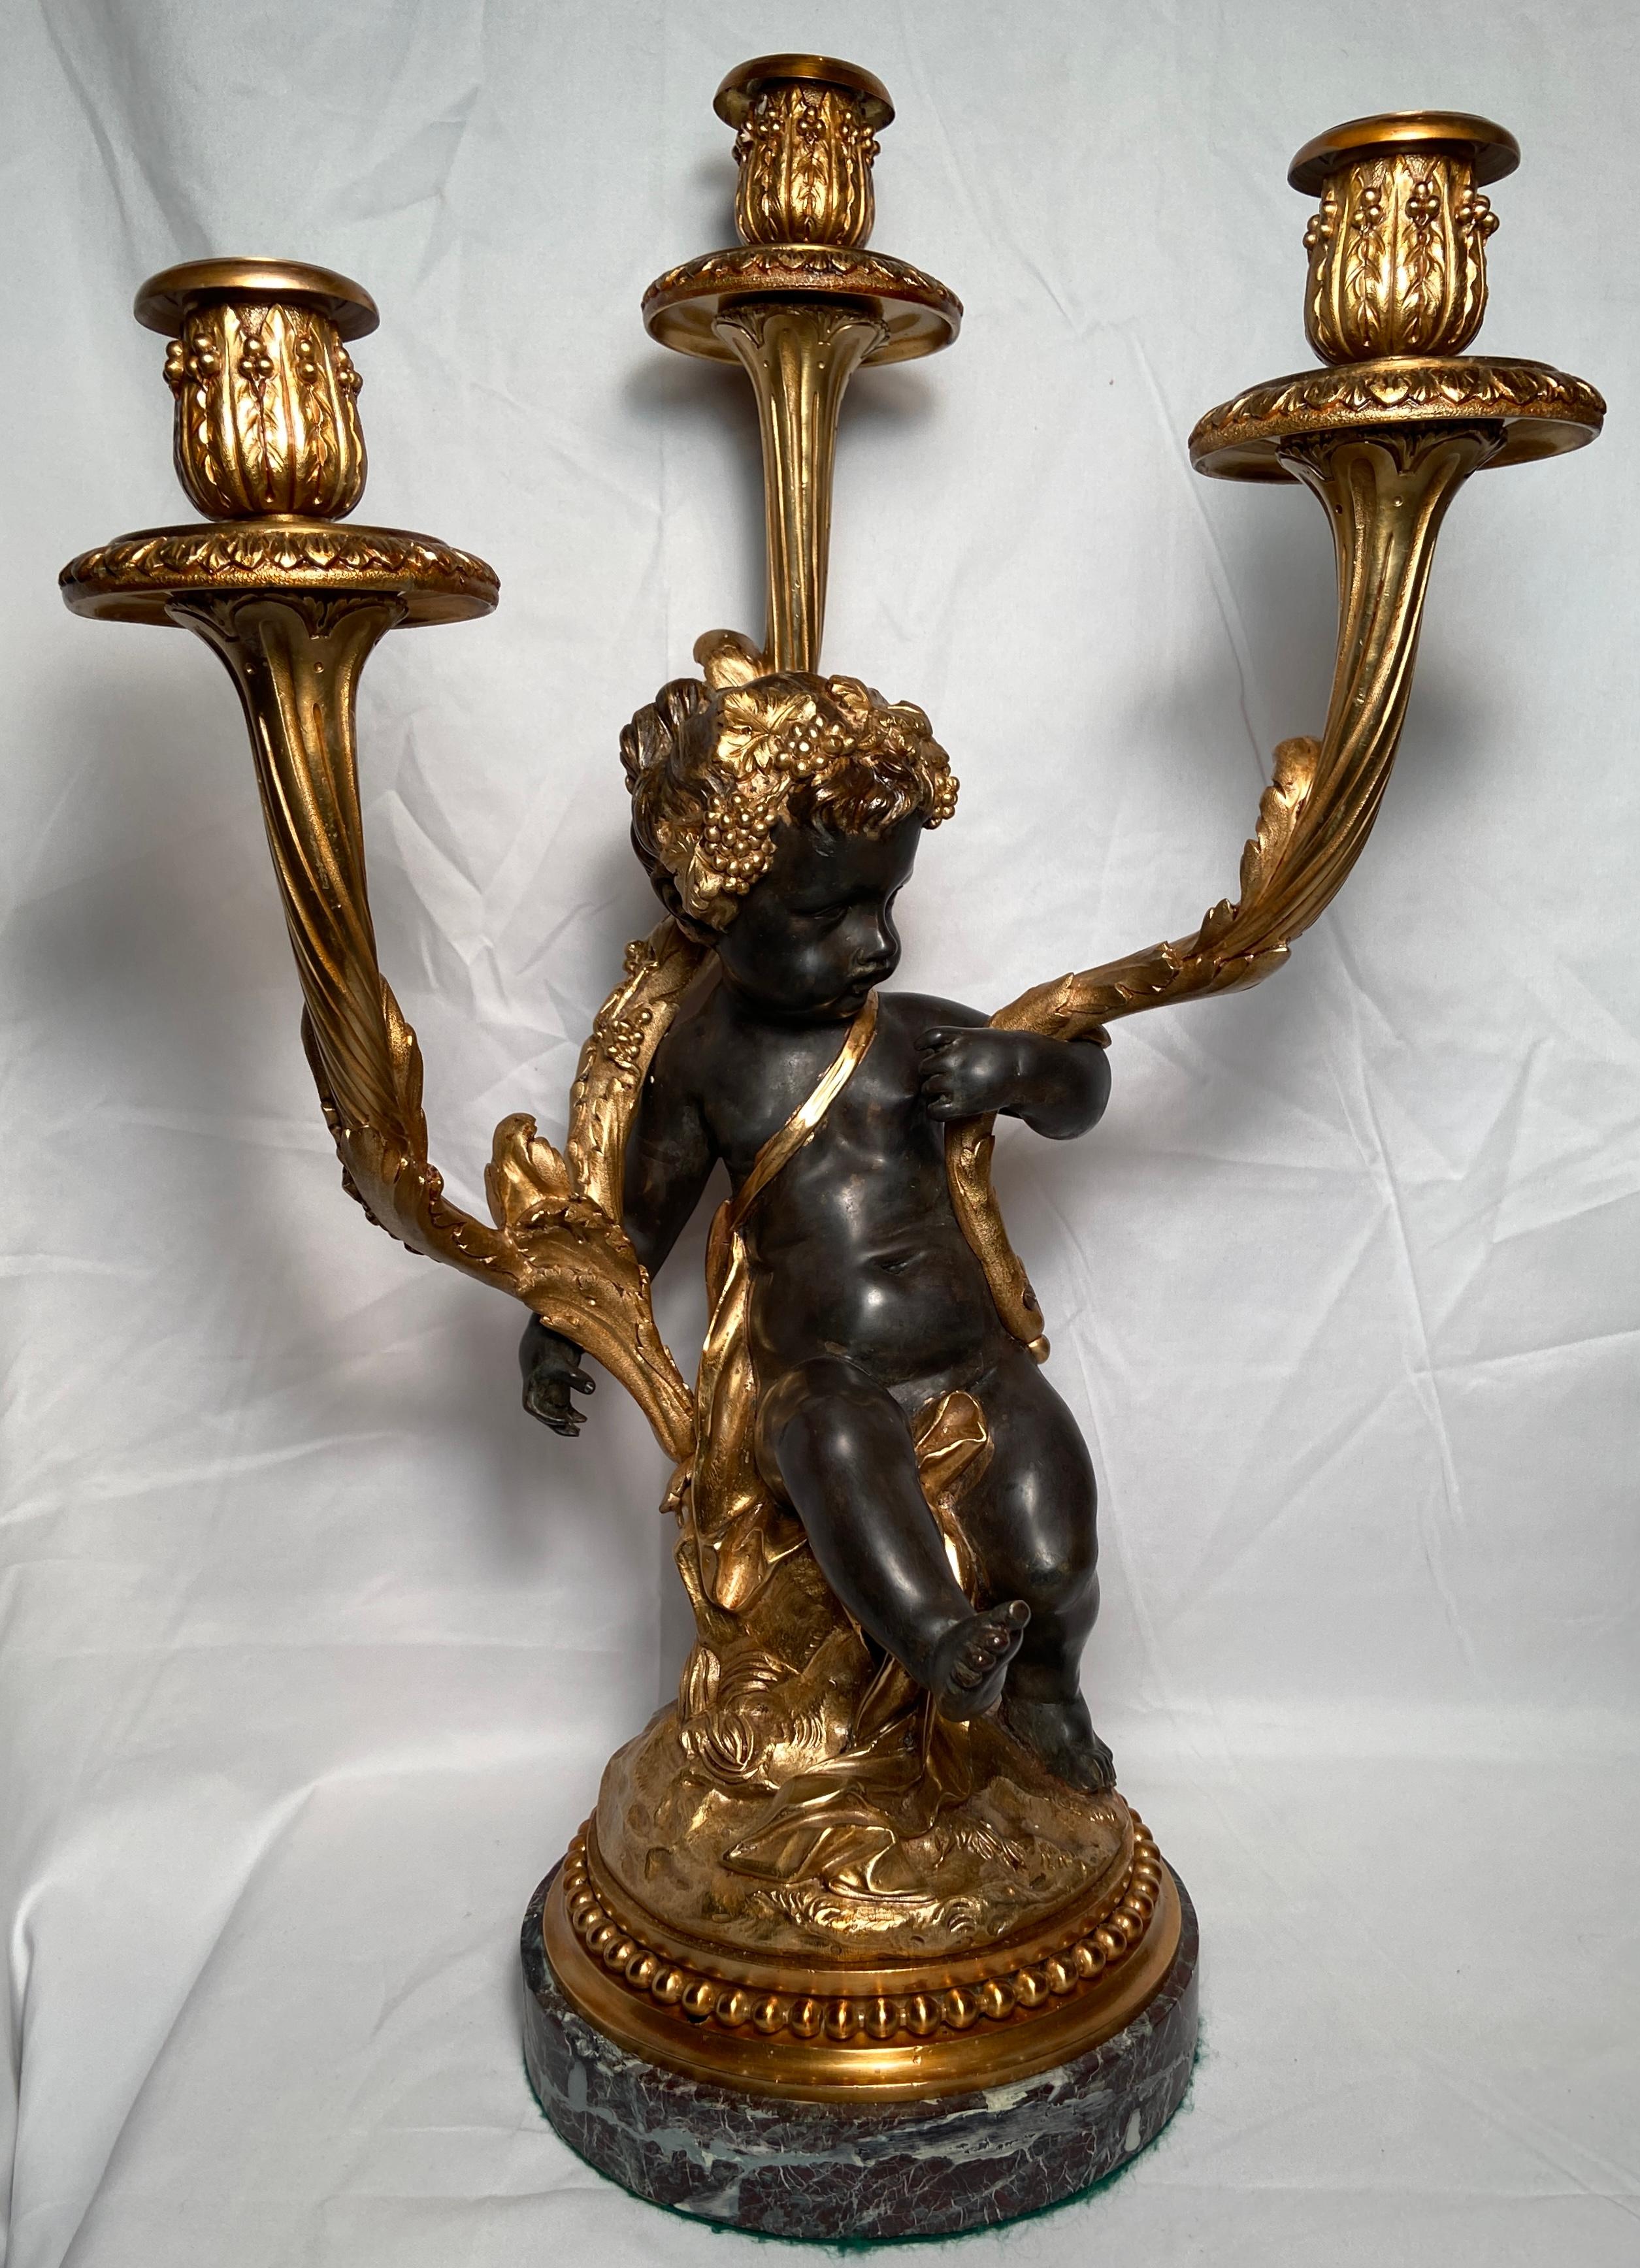 Pair Antique French Gold Bronze Bacchanalian Figure Candelabras, Circa 1870-1880 In Good Condition For Sale In New Orleans, LA